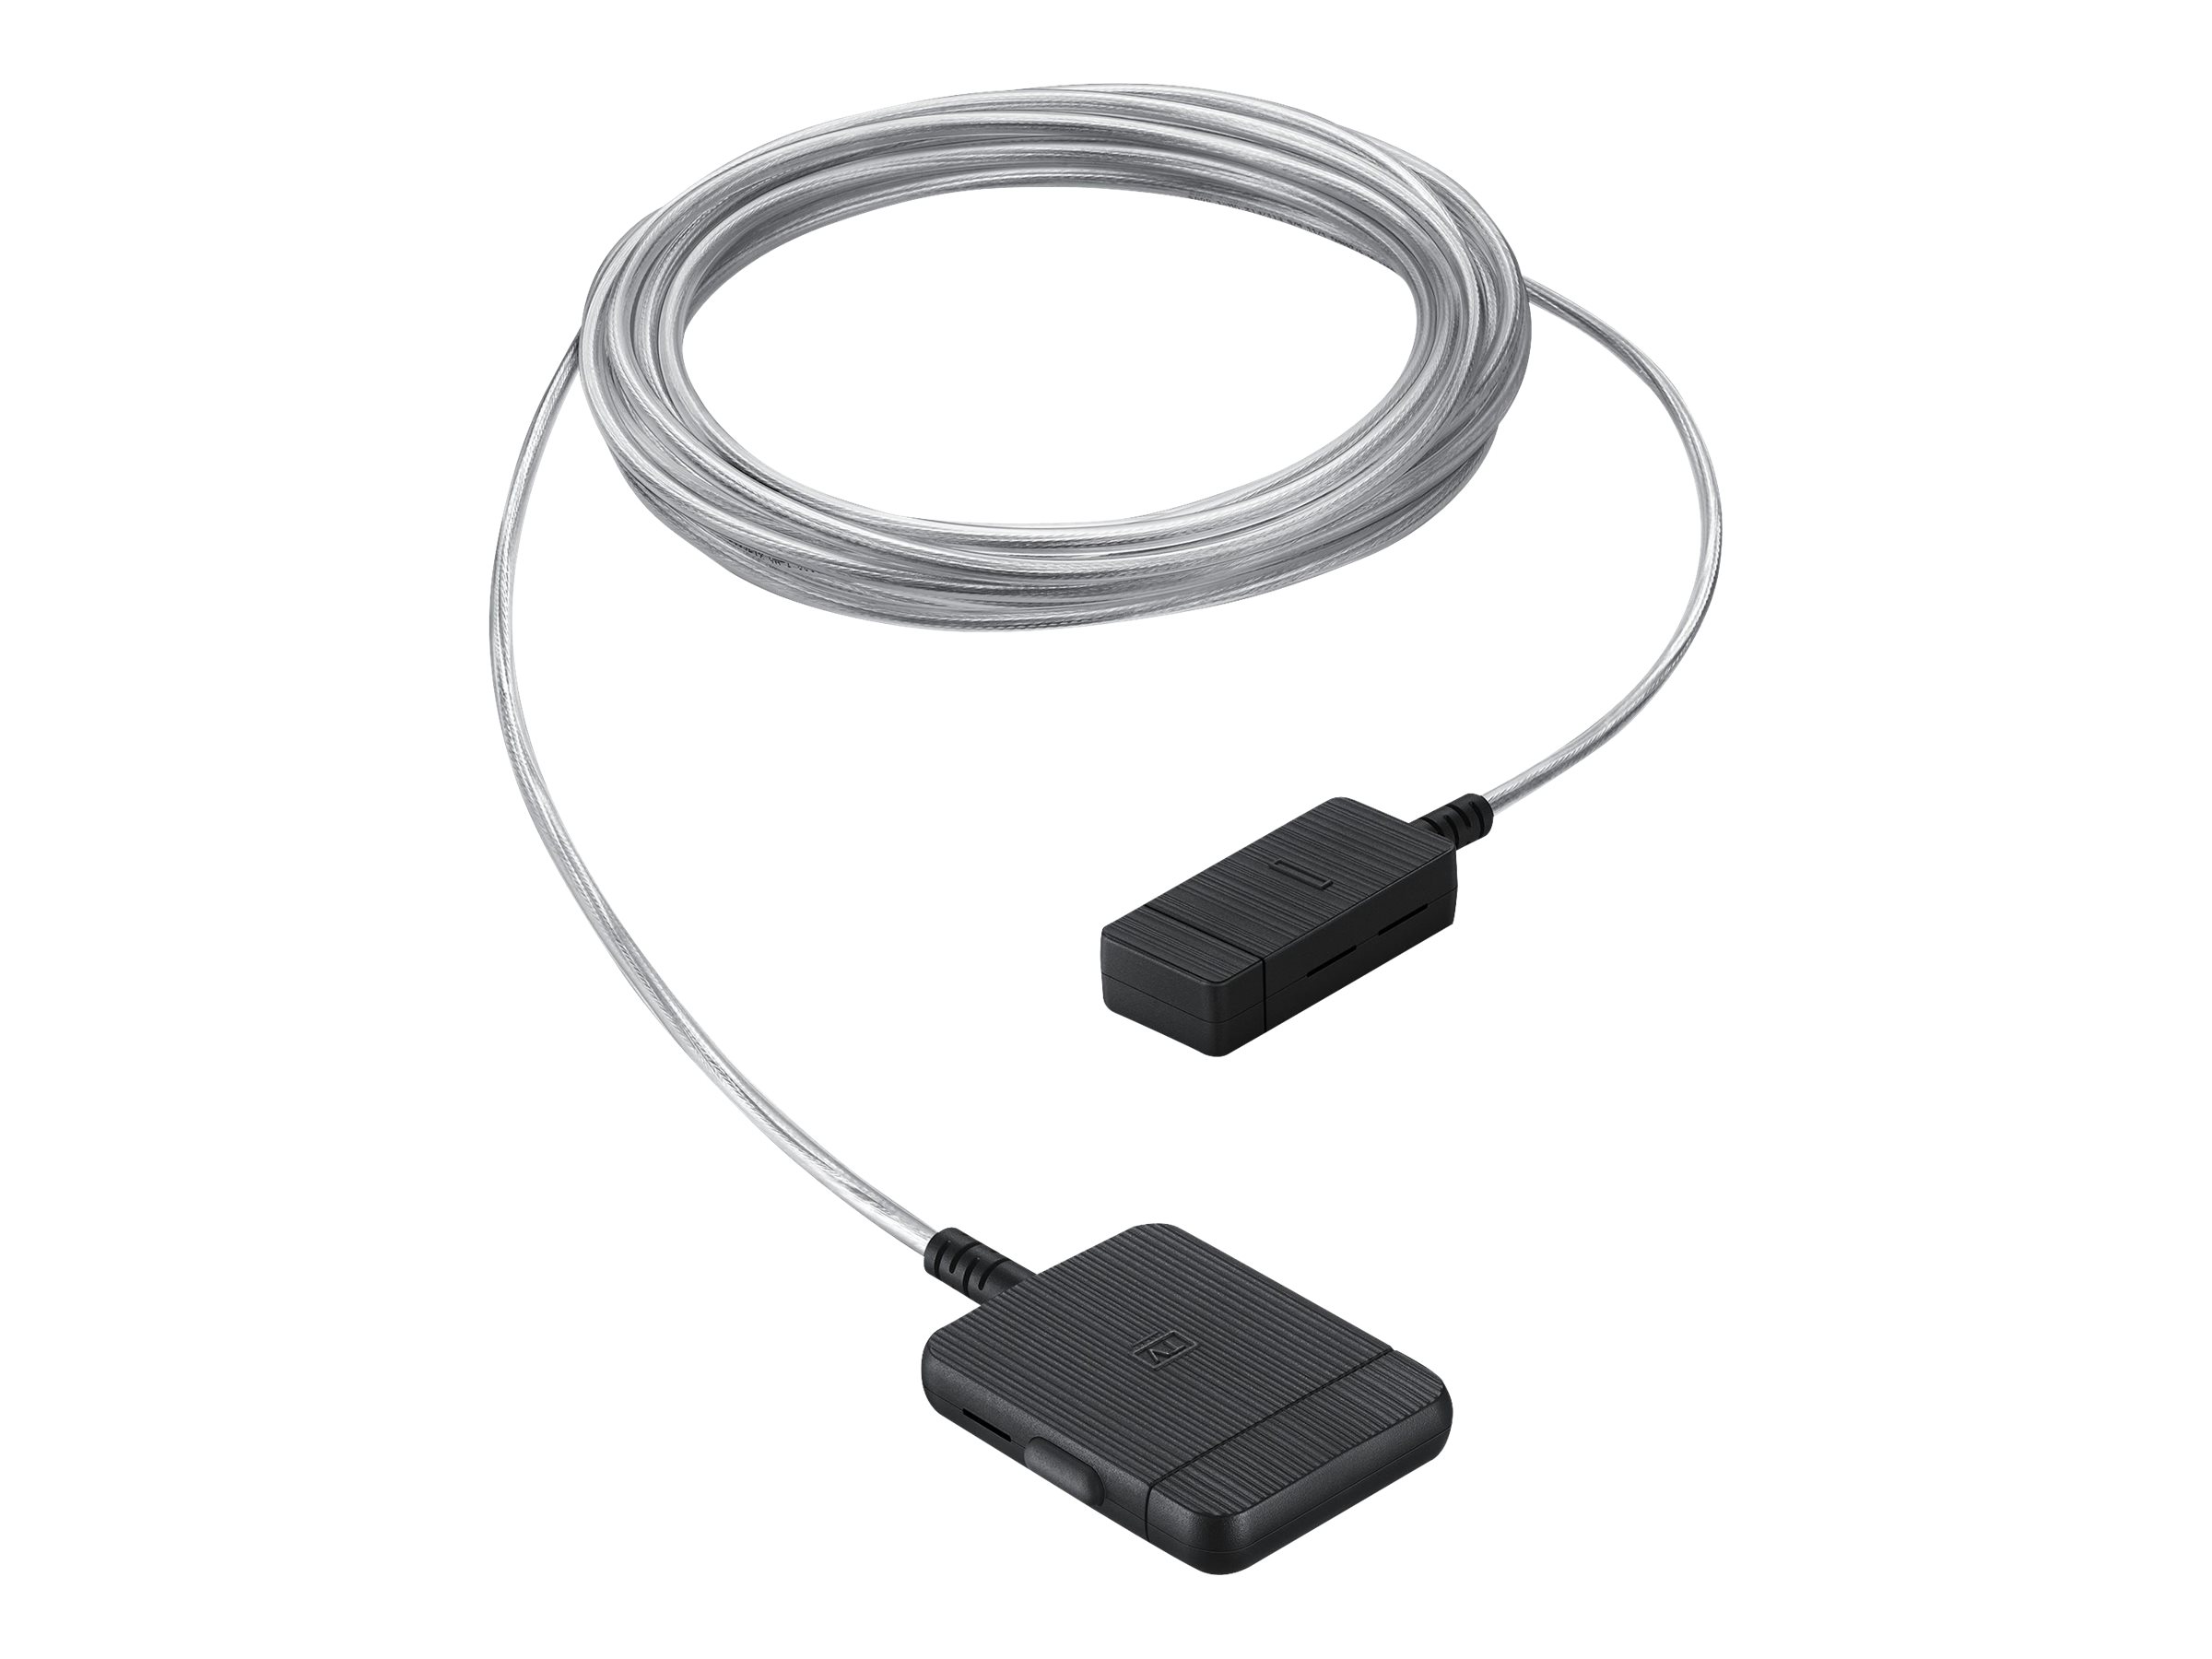 Samsung One Invisible Cable VG-SOCN85 - Video/Audiokabel (optisch) - One Connect mnnlich zu One Connect mnnlich - 15 m - Glasf